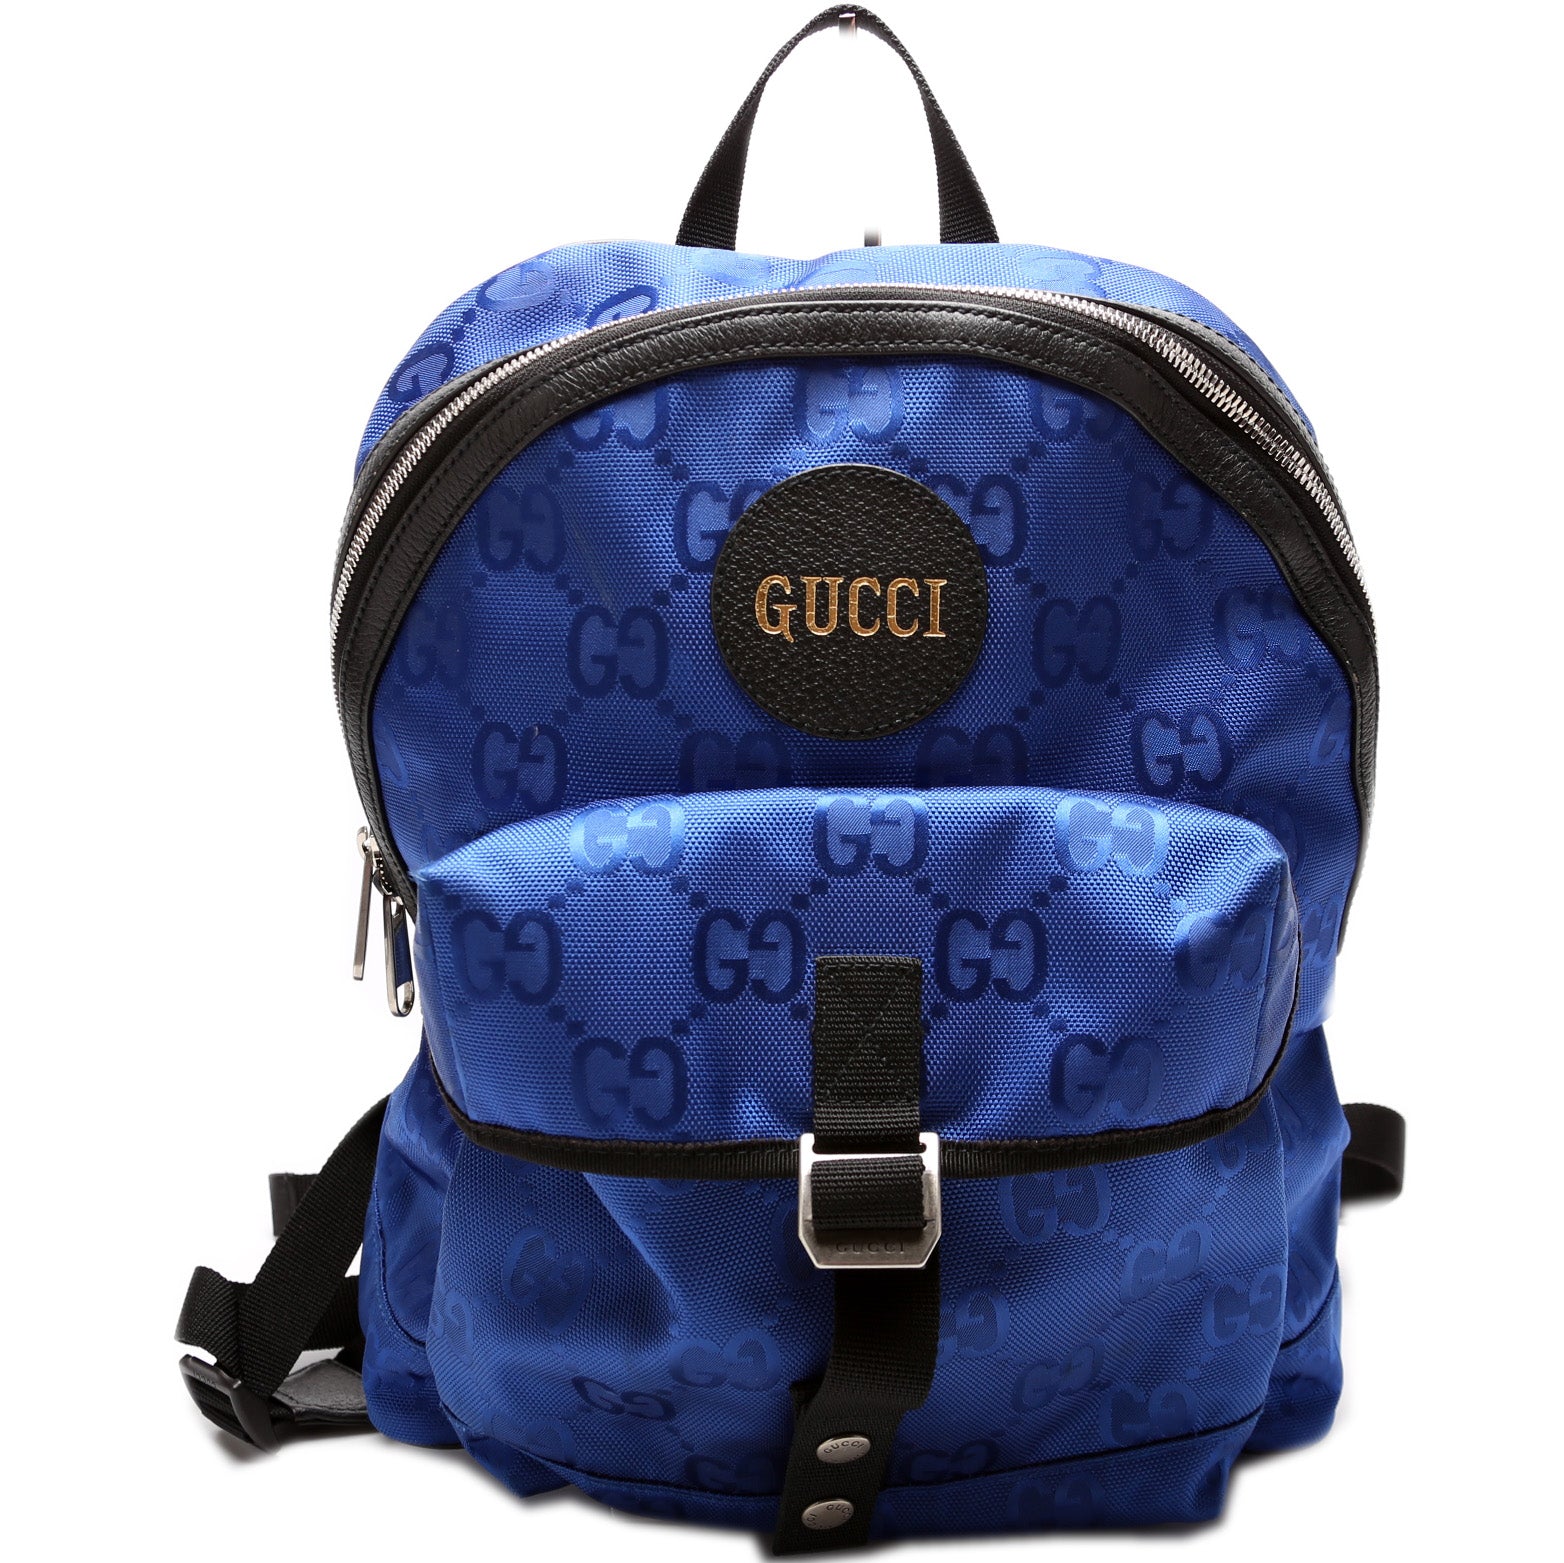 GUCCI: Off The Grid credit card holder in GG Supreme nylon and